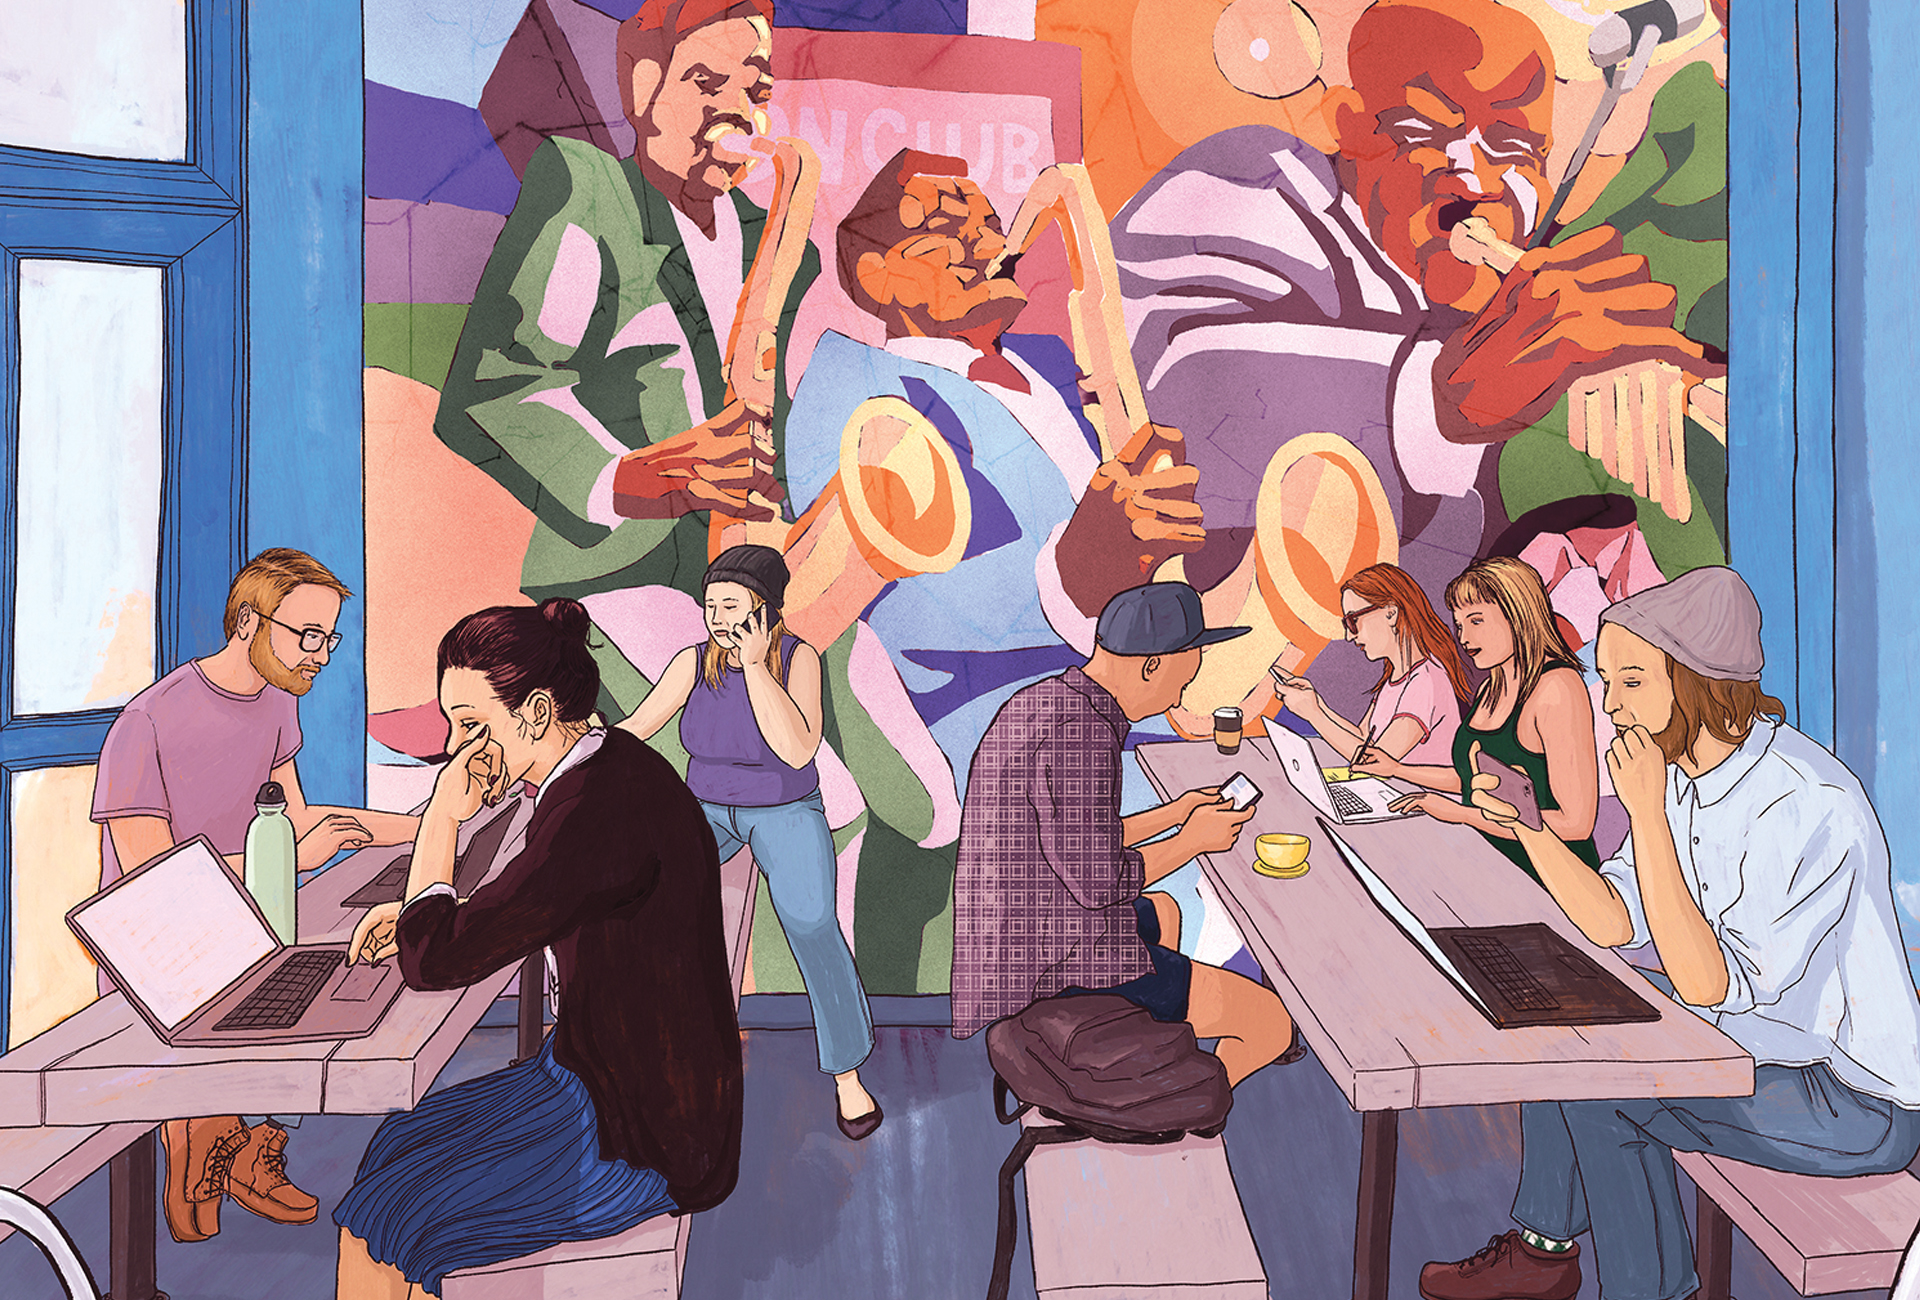 Illustration of the interior of a restaurant filled with millennials on their computers or devices. An old mural of an African-American jazz band overlooks the scene, suggesting gentrification.